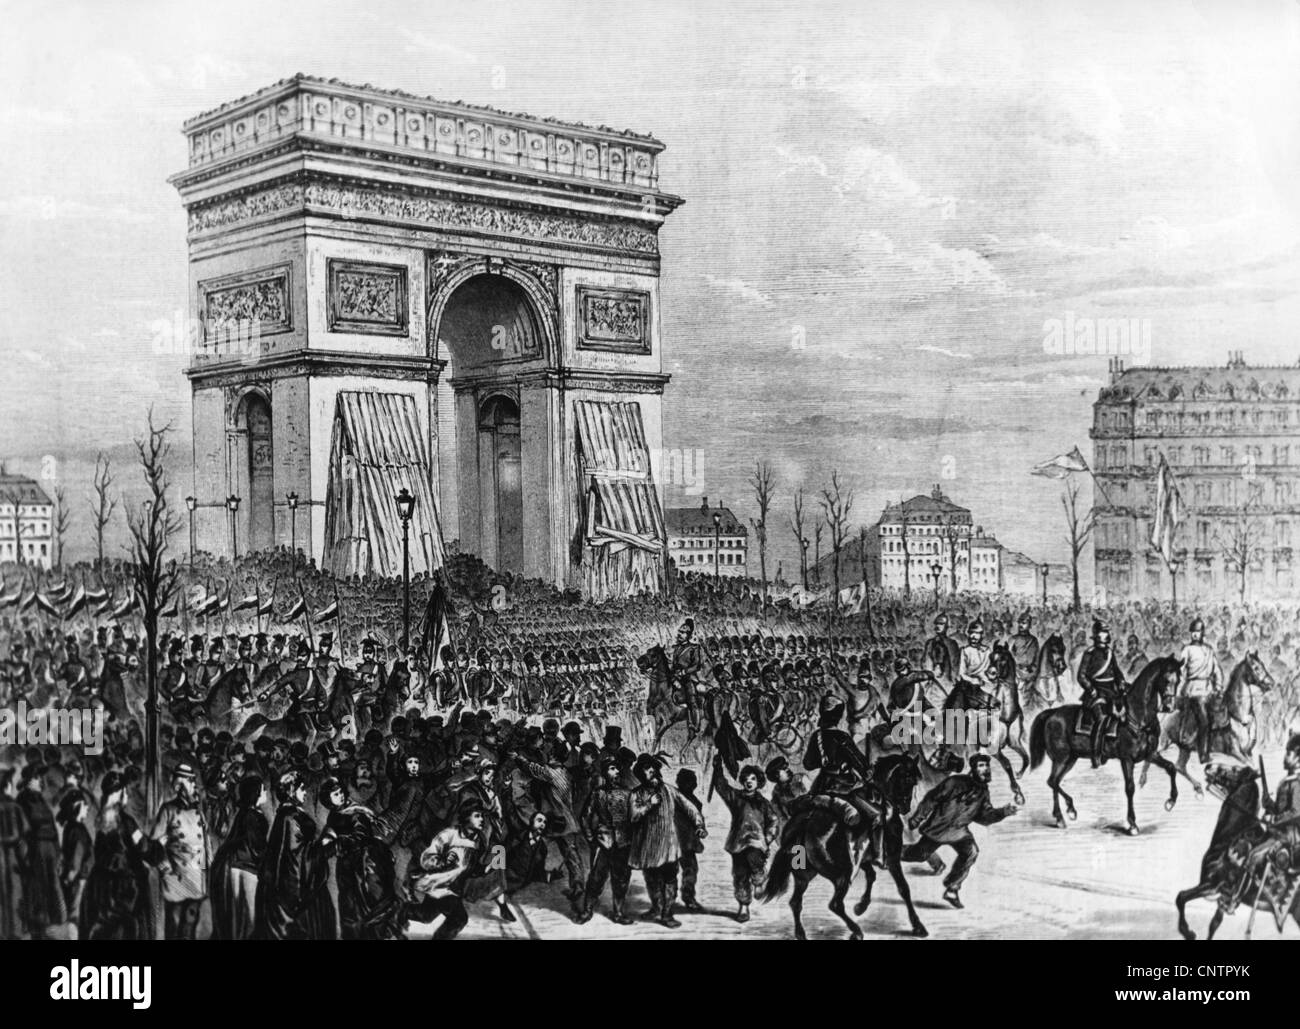 events, Franco-Prussian War 1870 - 1871, occupation of Paris, German troops entering the city, 1.3.1871, contemporary wood engraving, Arc de Triomphe, soldiers, Bavarians, Prussians, population, Germany, France, Franco - Prussian, 19th century, historic, historical, people, Additional-Rights-Clearences-Not Available Stock Photo